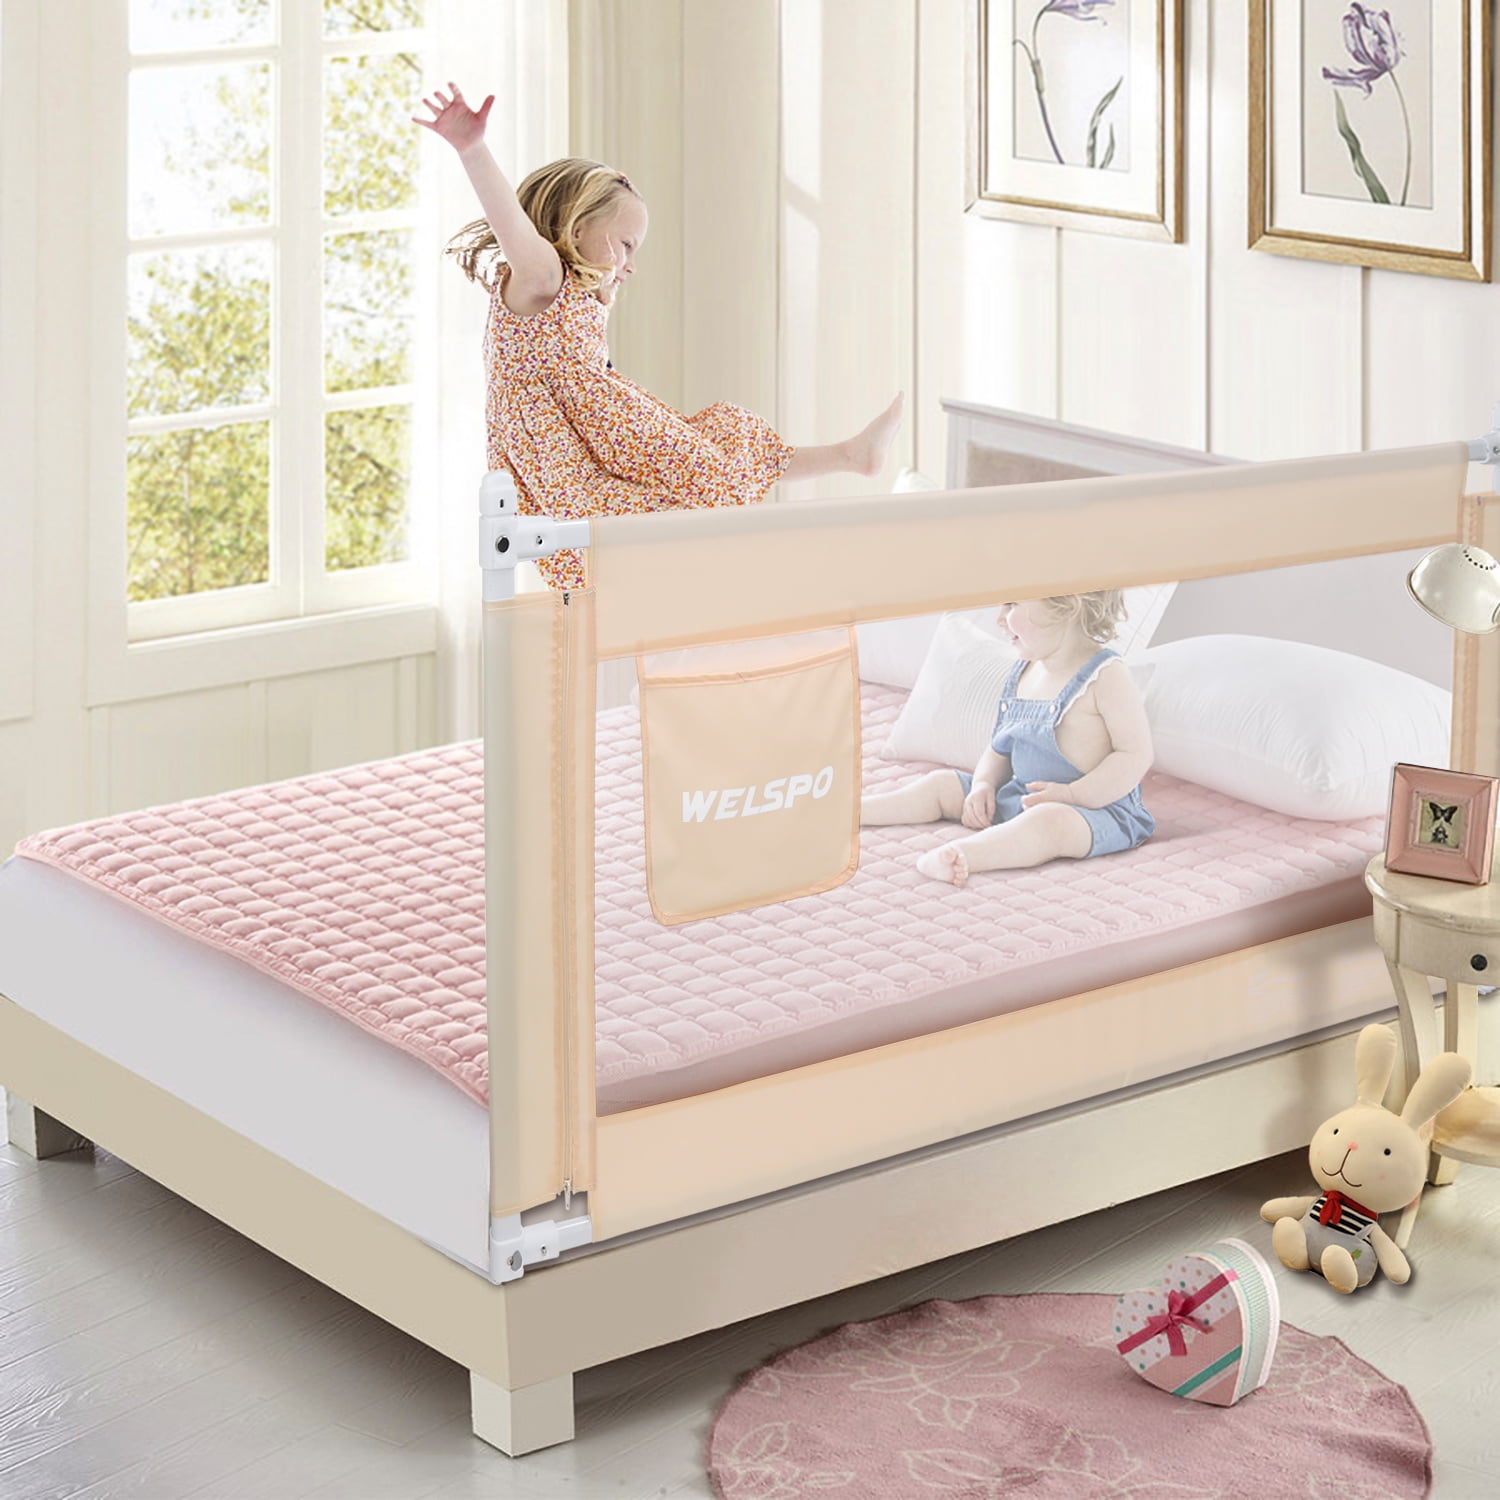 Bed Rail For Toddler Sided Guard, Baby Room With Queen Size Bed